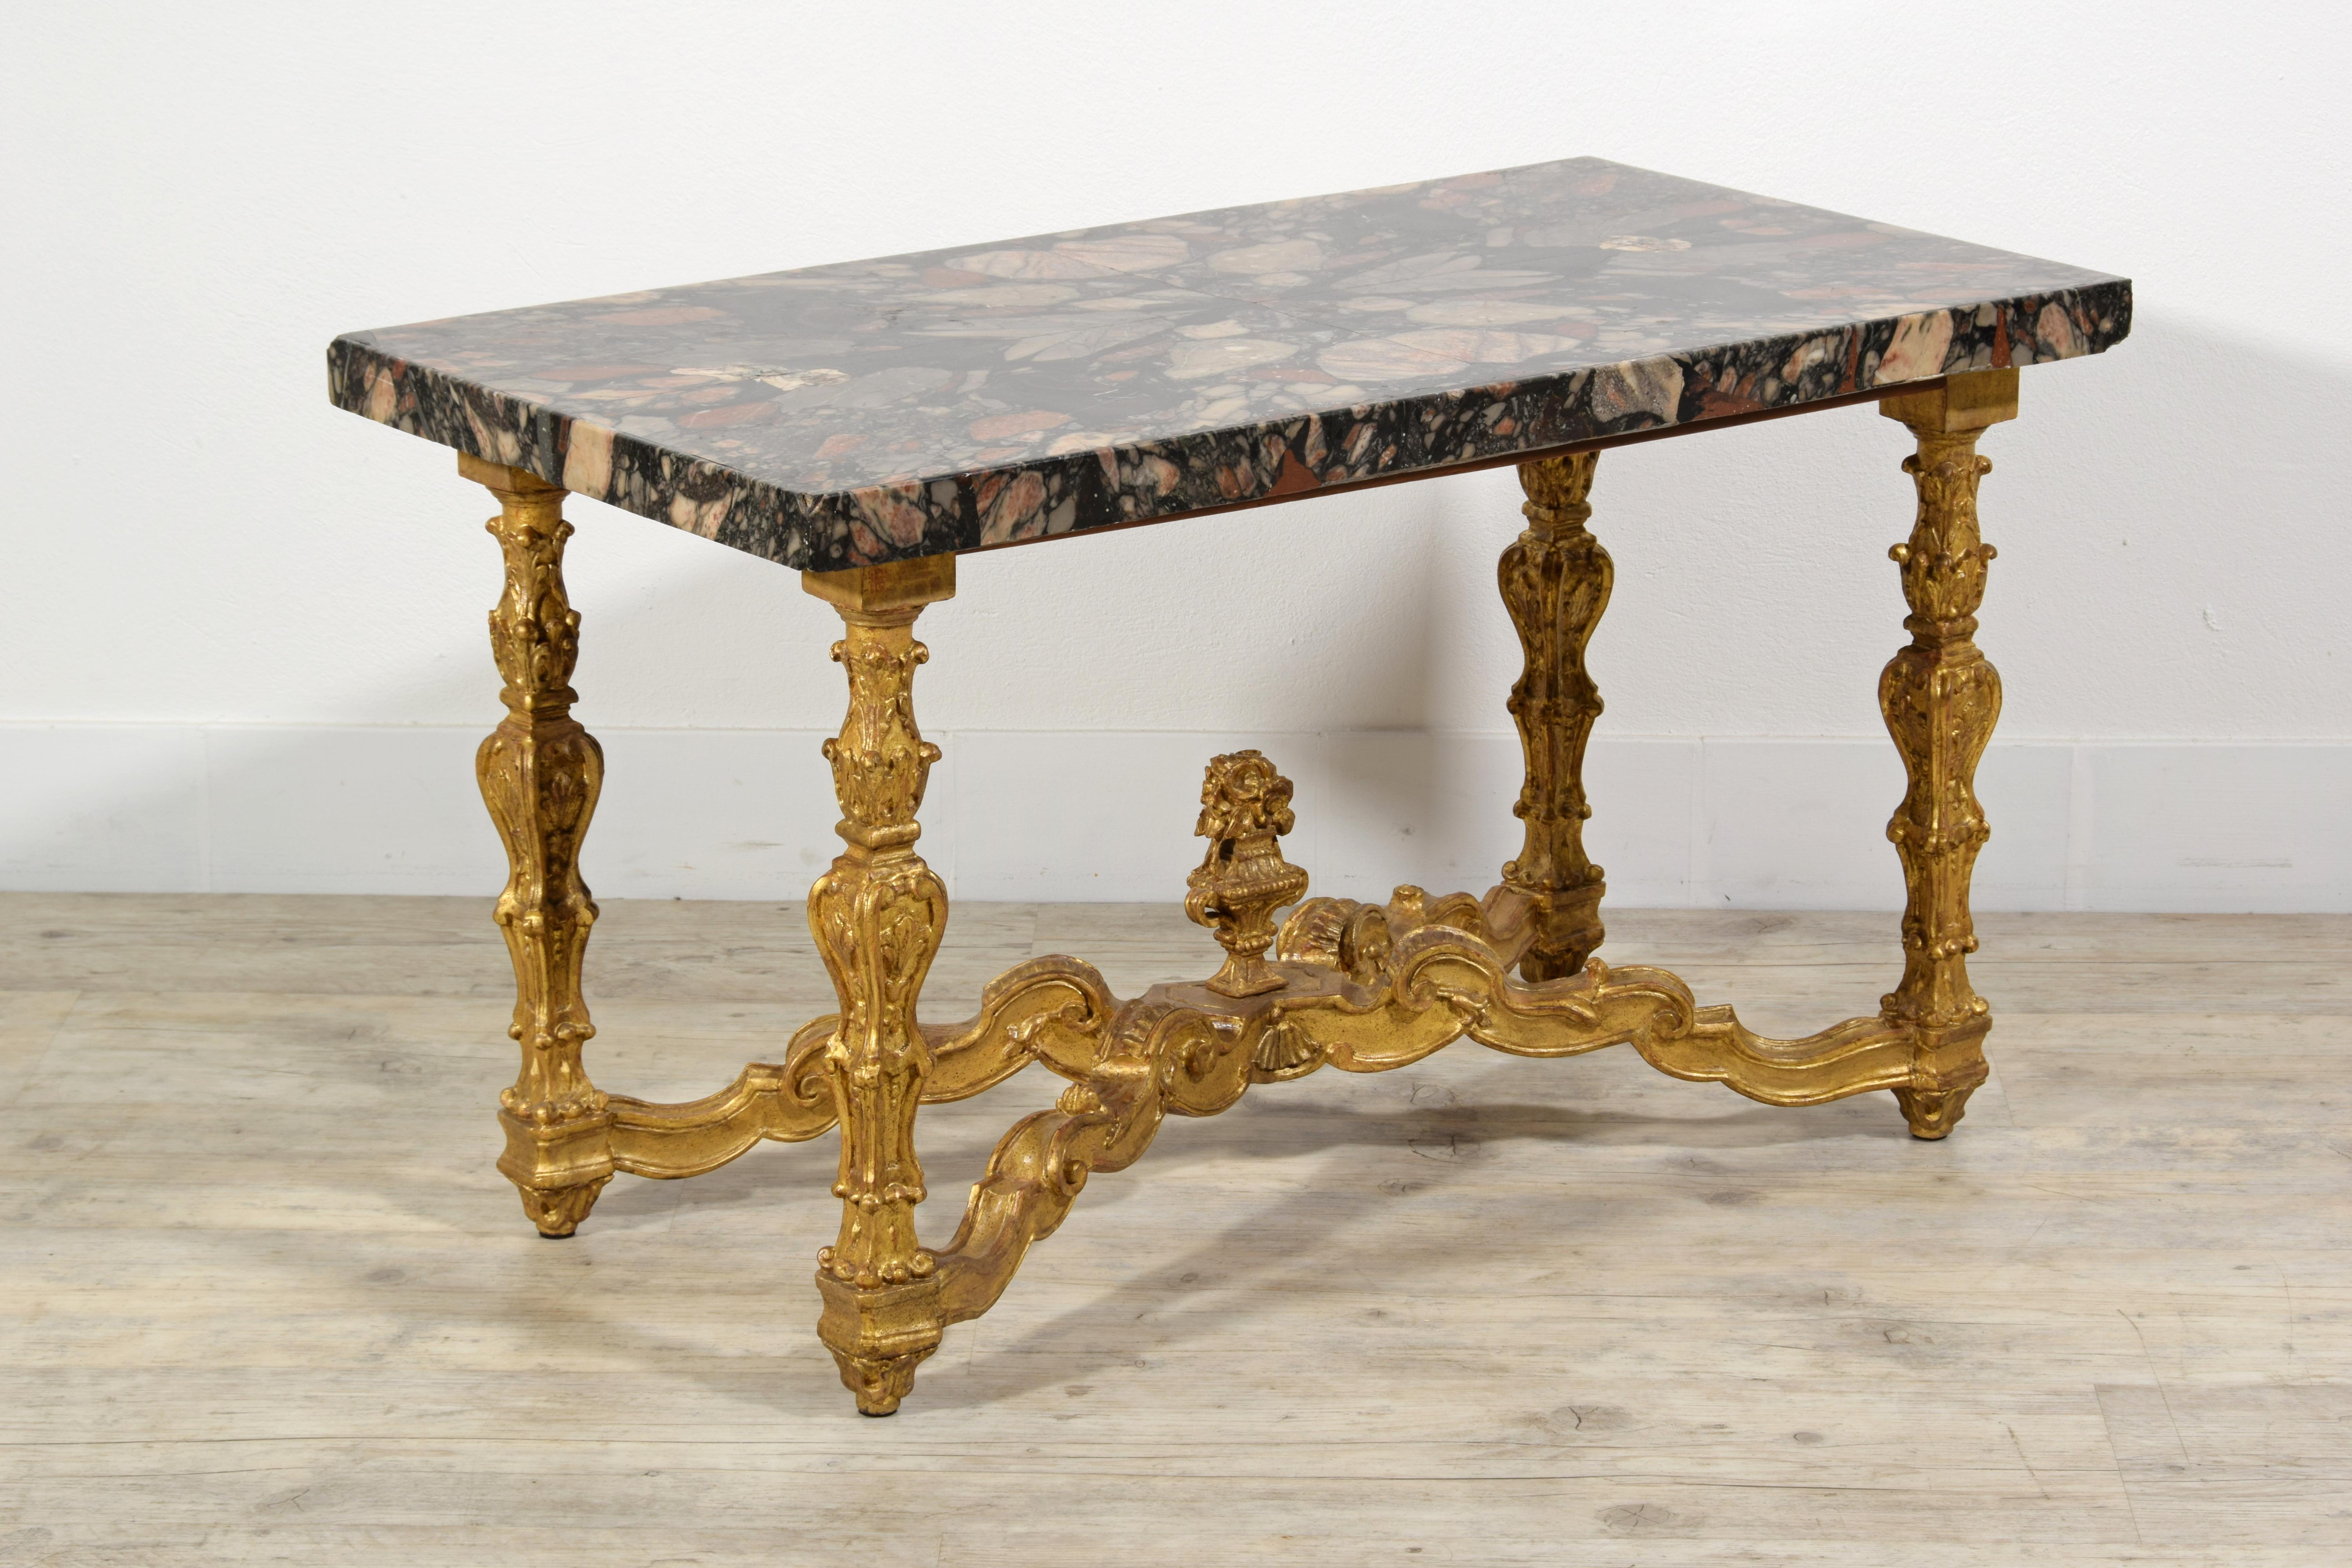 Italian coffee table with 18th century marble top and carved giltwood base.
Measurements: cm W 91 x D 49 x H 52, top thickness 4 cm.
This coffee table, from the center, was made in Italy, with the use of ancient materials, between the end of the